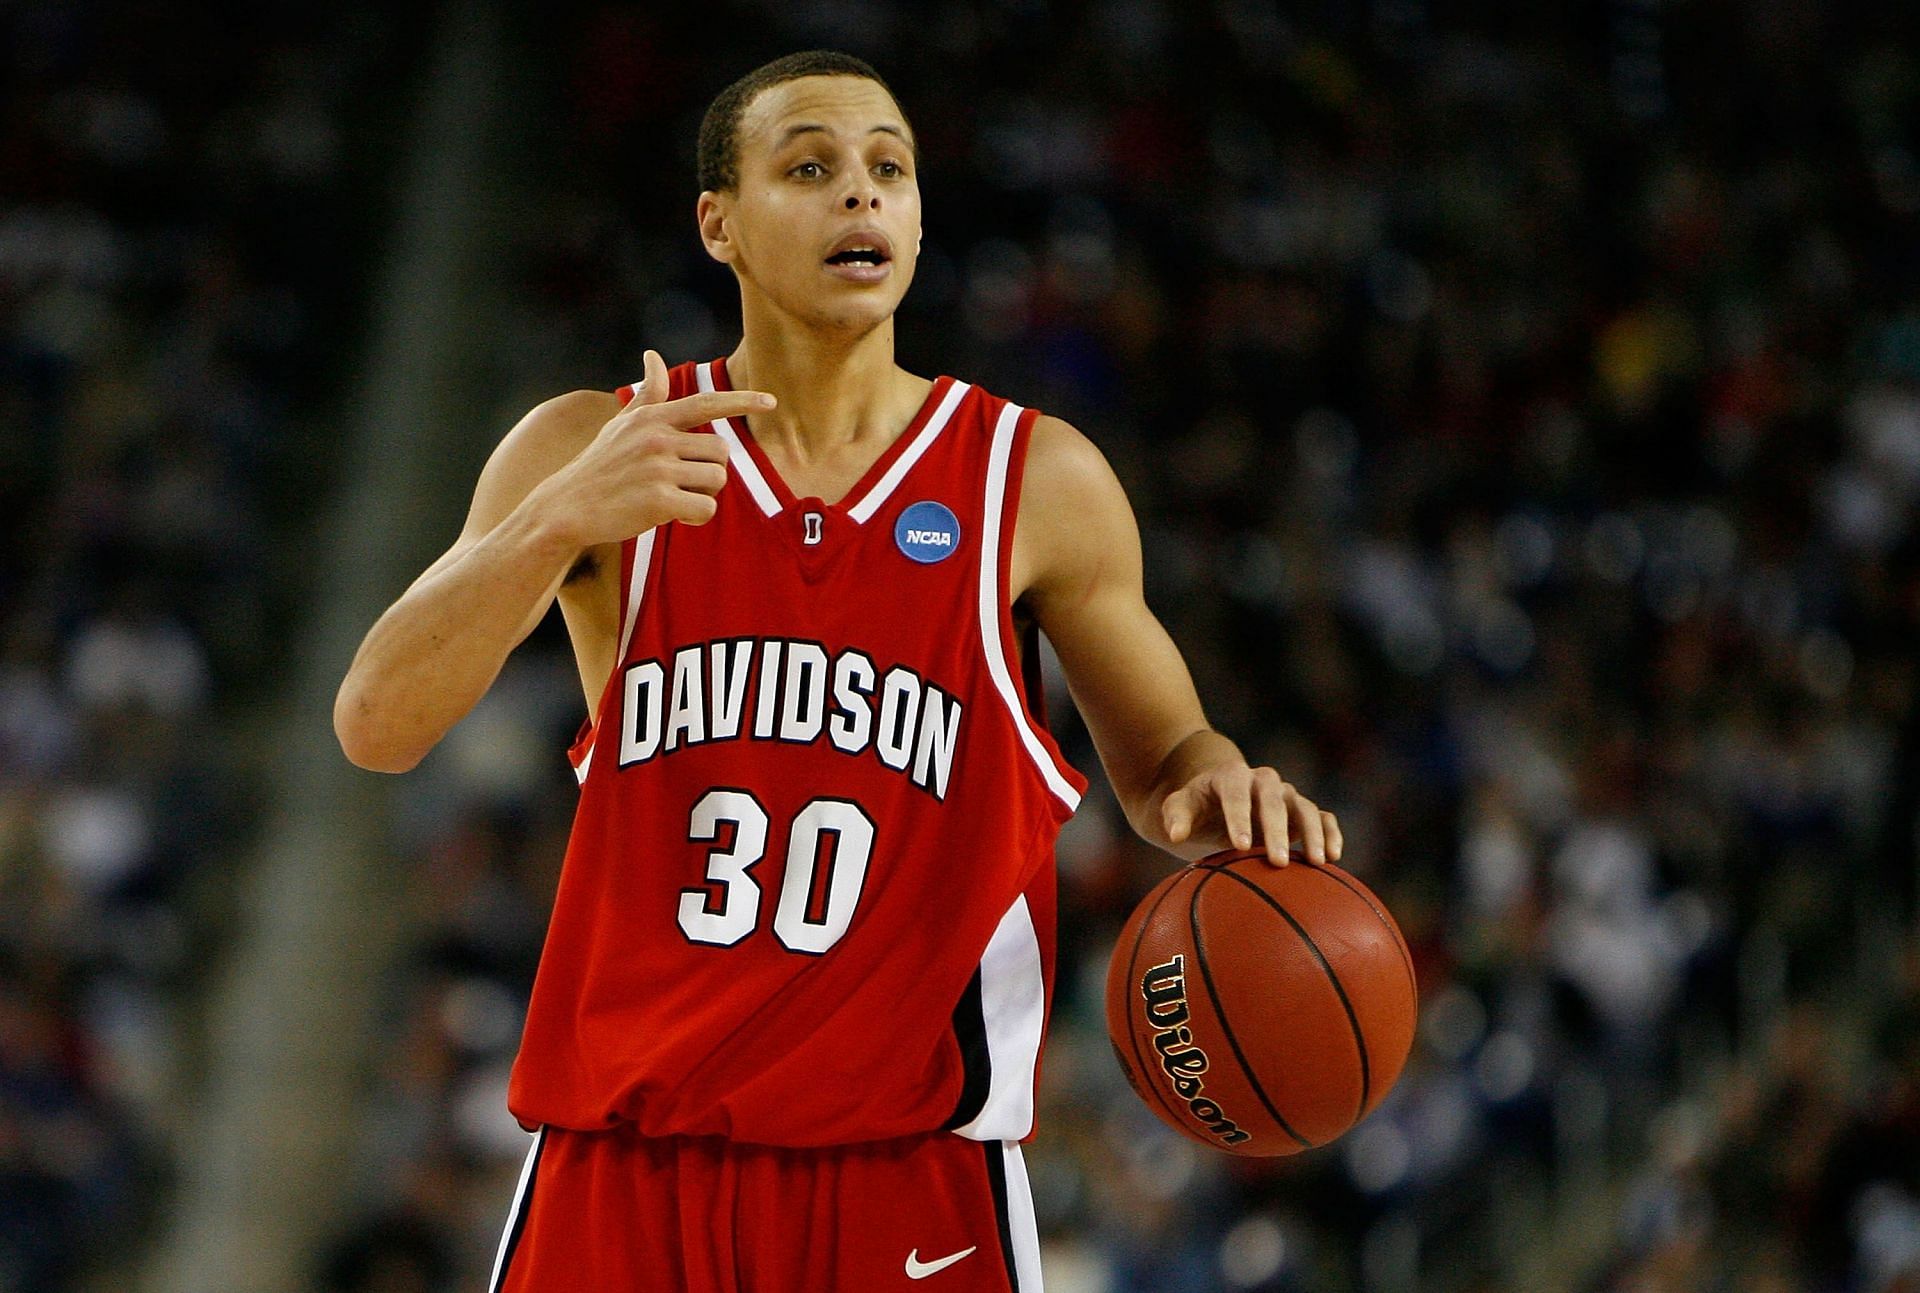 Steph Curry playing for Davidson College